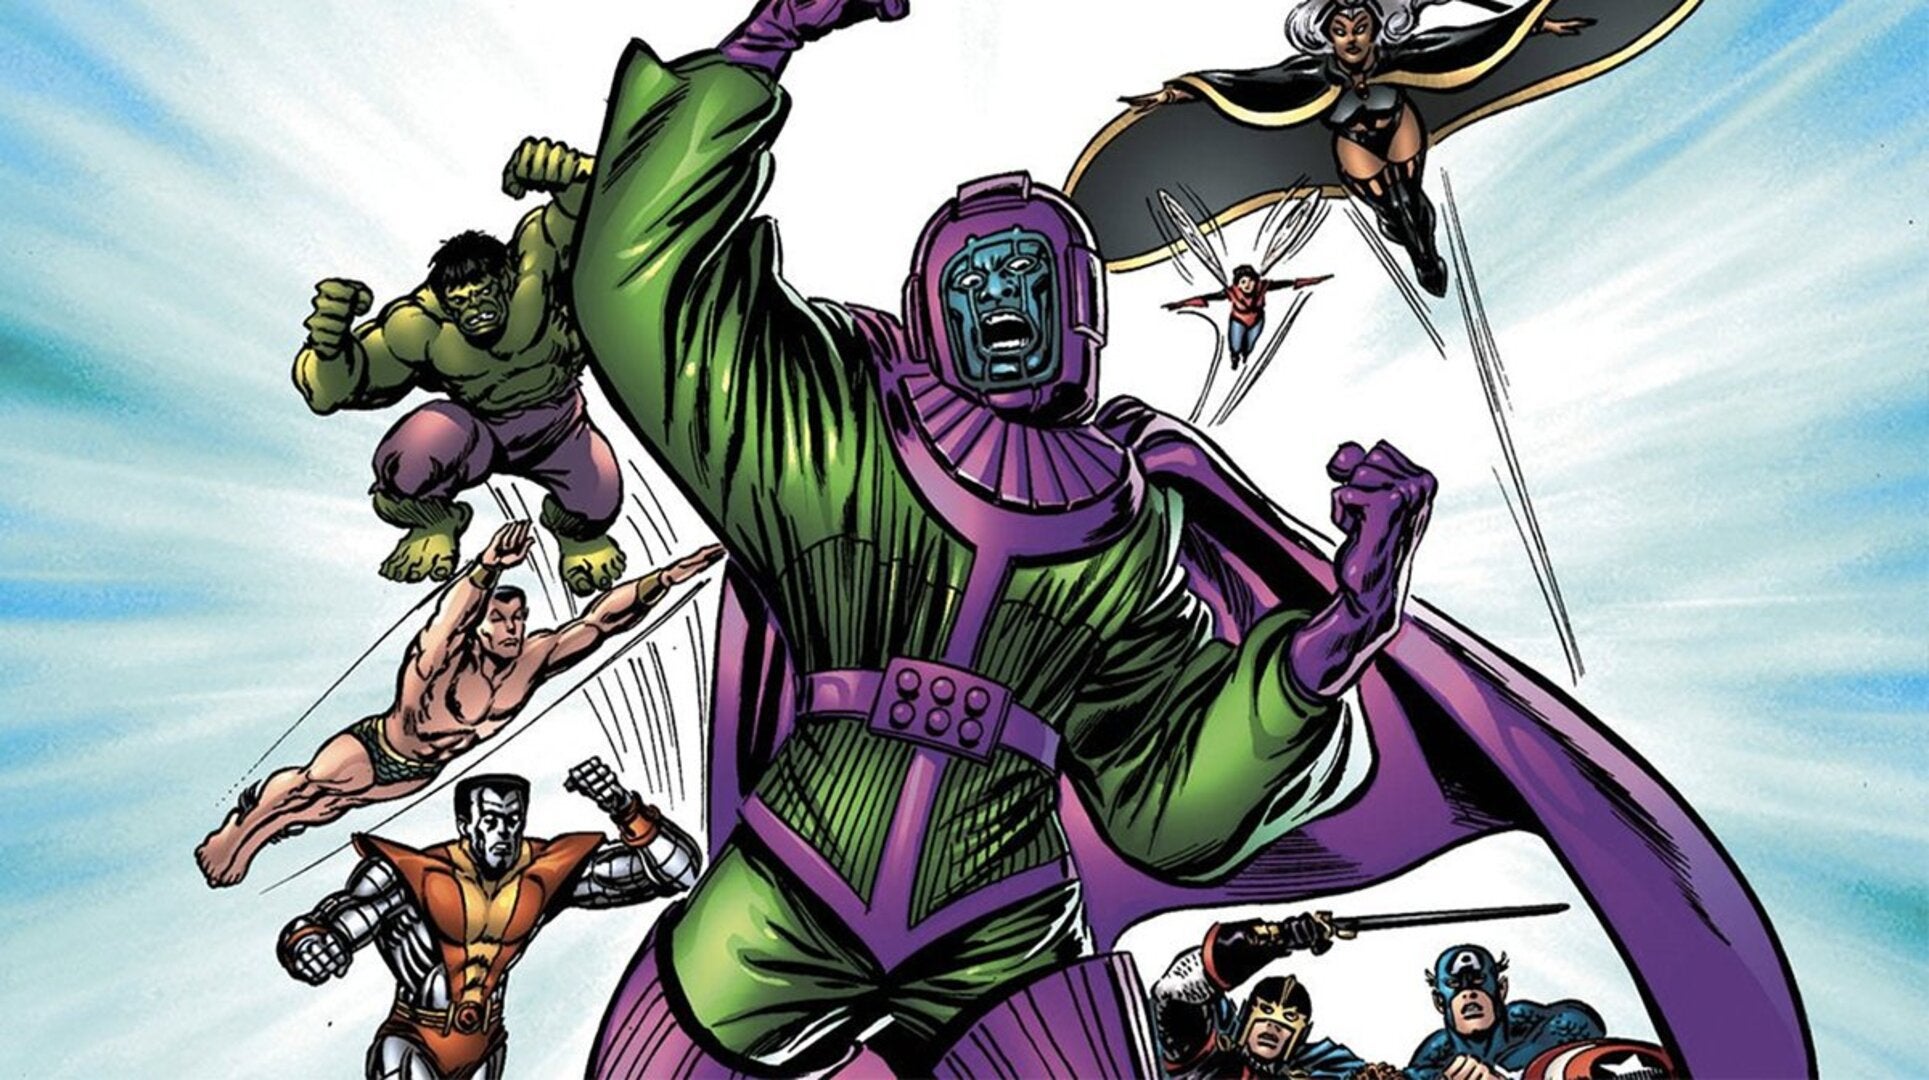 An illustrated image featuring Kang in a fighting stance with heroes behind him